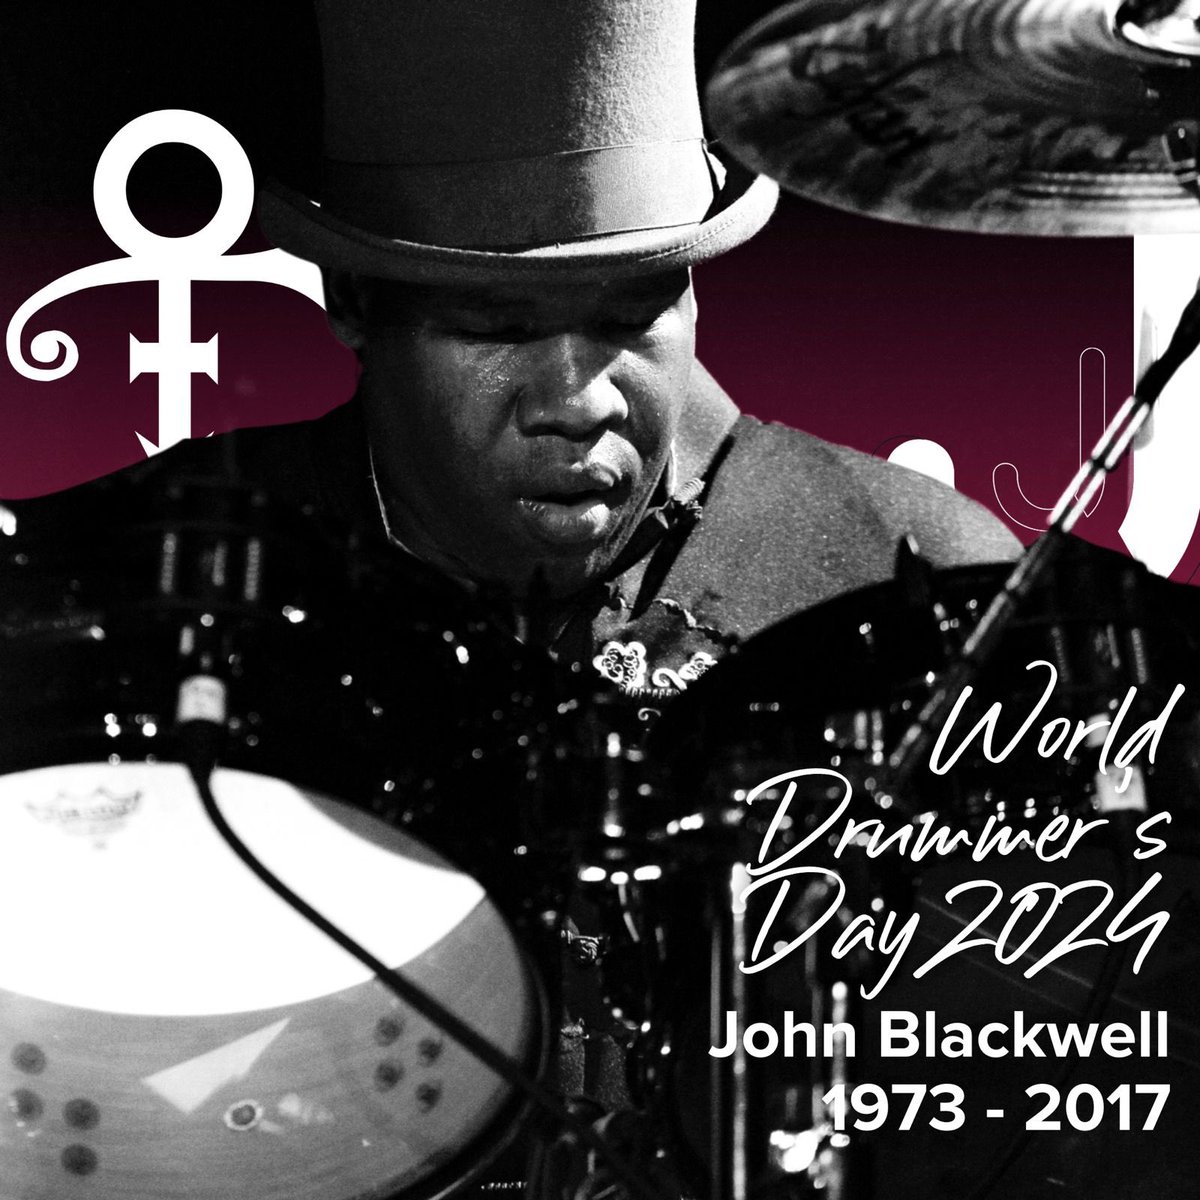 🥁🌍 Happy #WorldDrummersDay! Drummers, the heartbeat of music, unite us in harmony. Let's honor legends like John Blackwell and celebrate the rhythm-makers who inspire us daily. 🎵❤️ #JammaMusic #CelebrateDrummers @prince @PaisleyPark